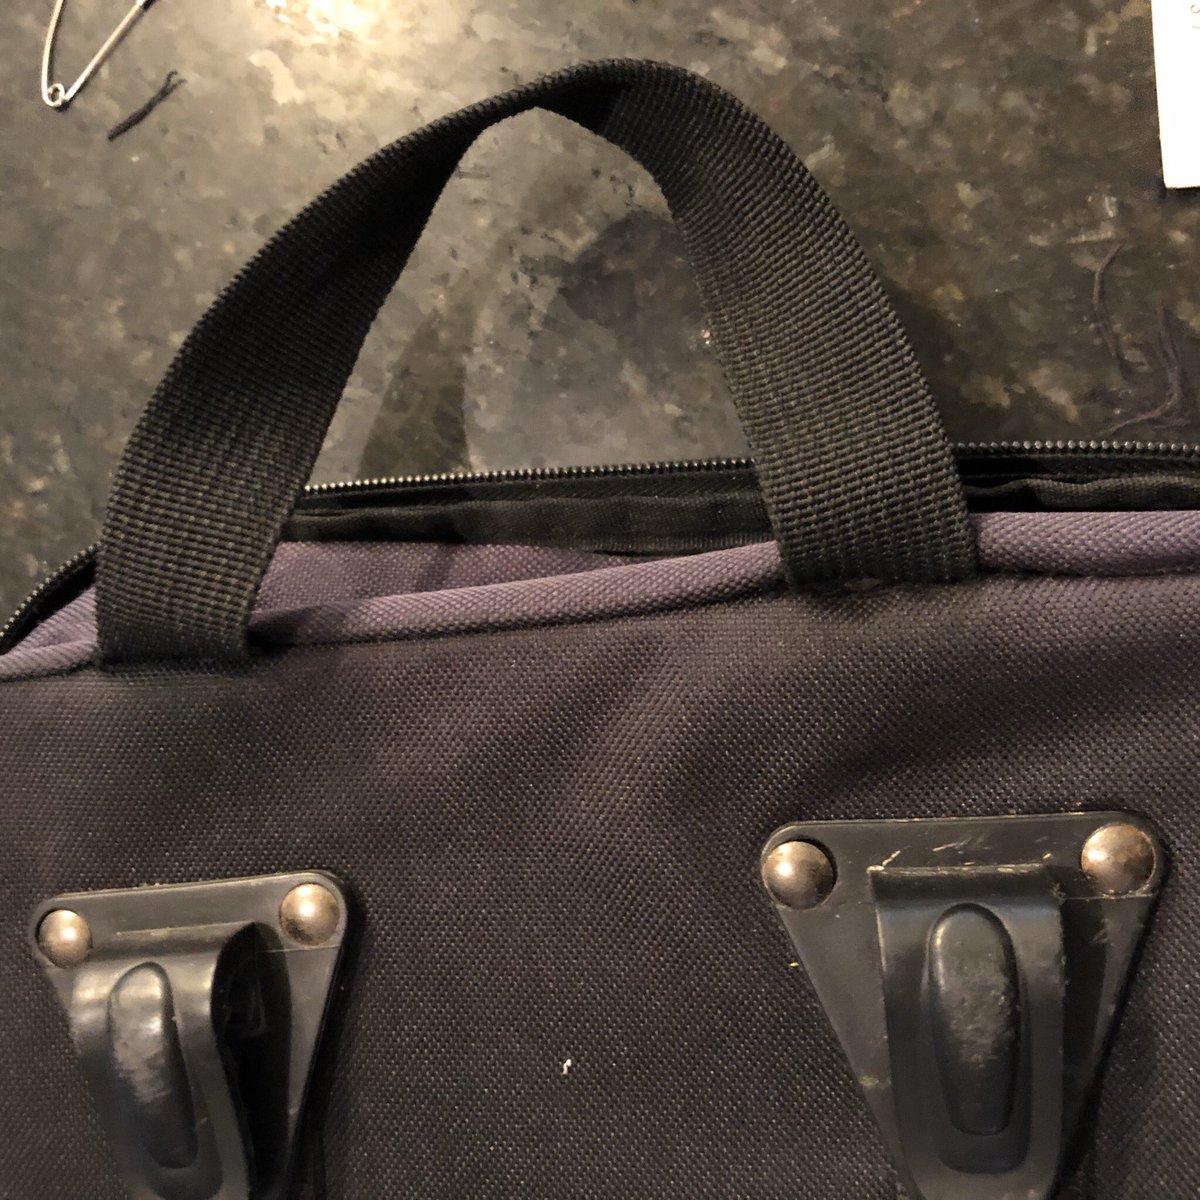 Underside view of fix. It is not factory-certified, this is an 8-year old bag that has seen heavy use. I just need it for neighborhood and light (i.e., S24O) touring.